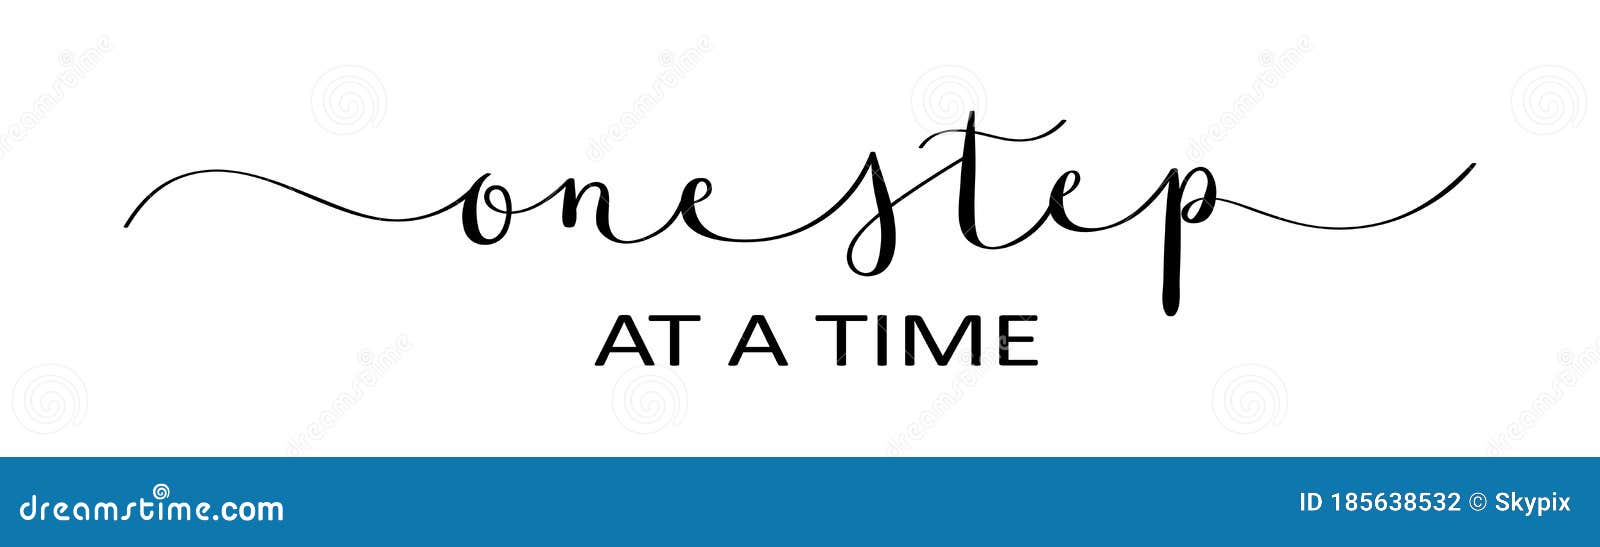 one step at a time black brush calligraphy banner